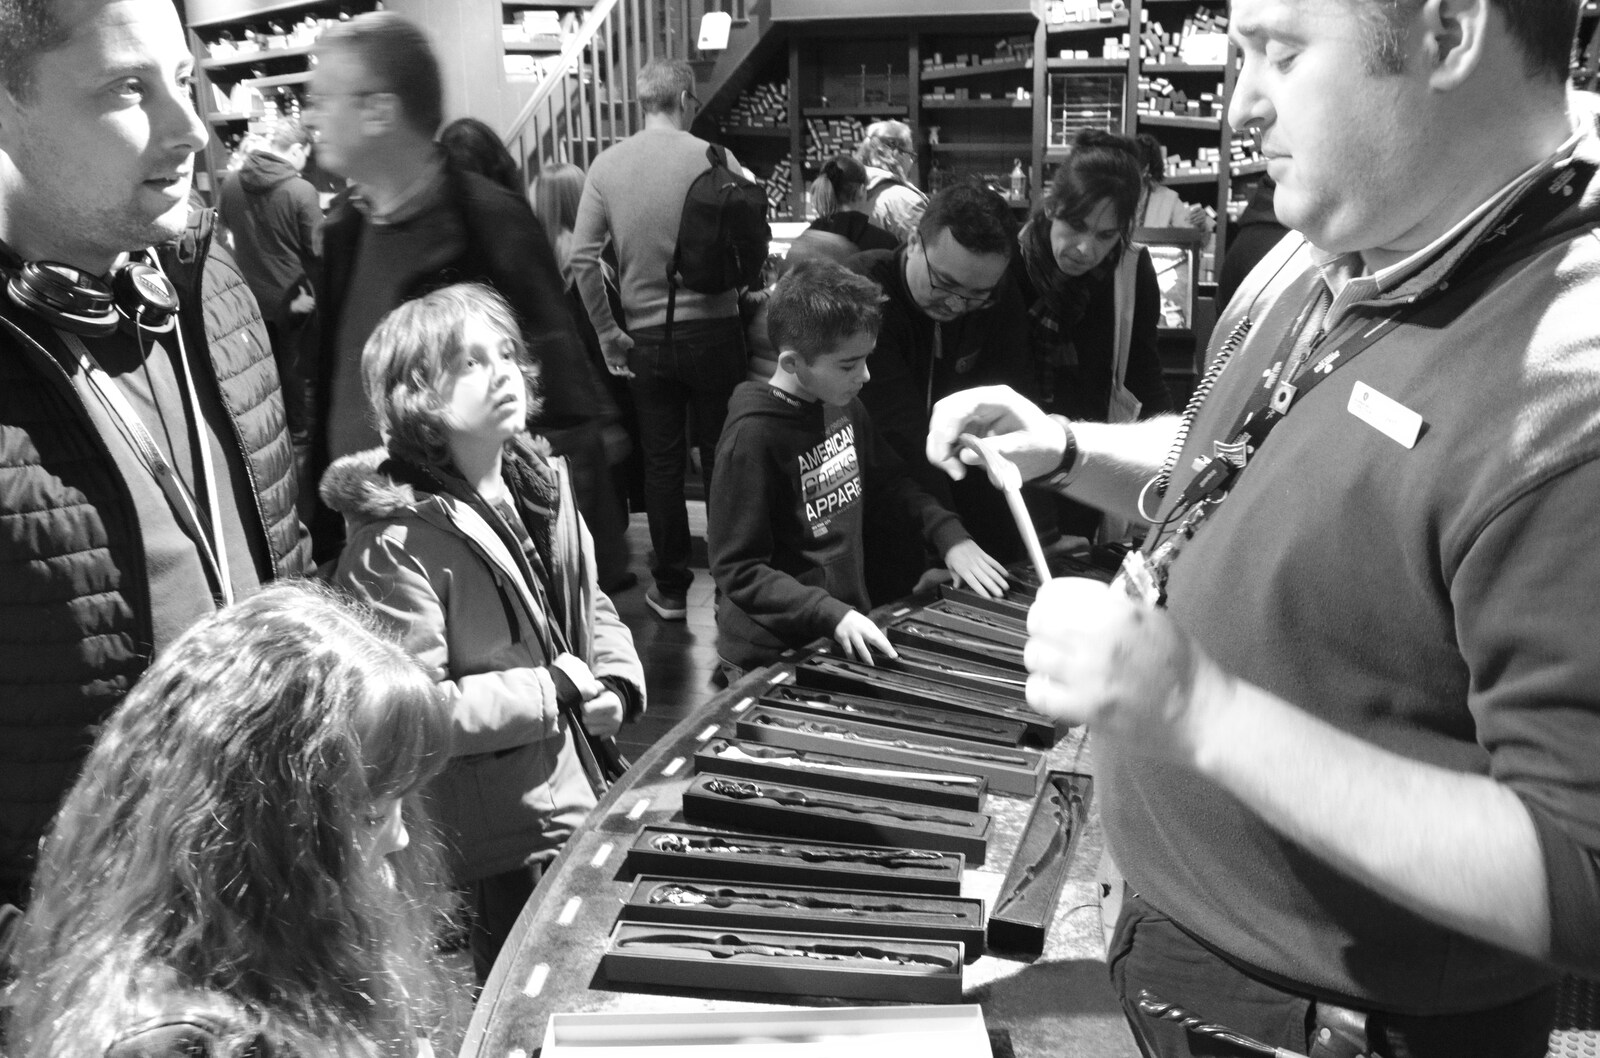 Fred looks at wands from A Trip to Harry Potter World, Leavesden, Hertfordshire - 16th February 2020